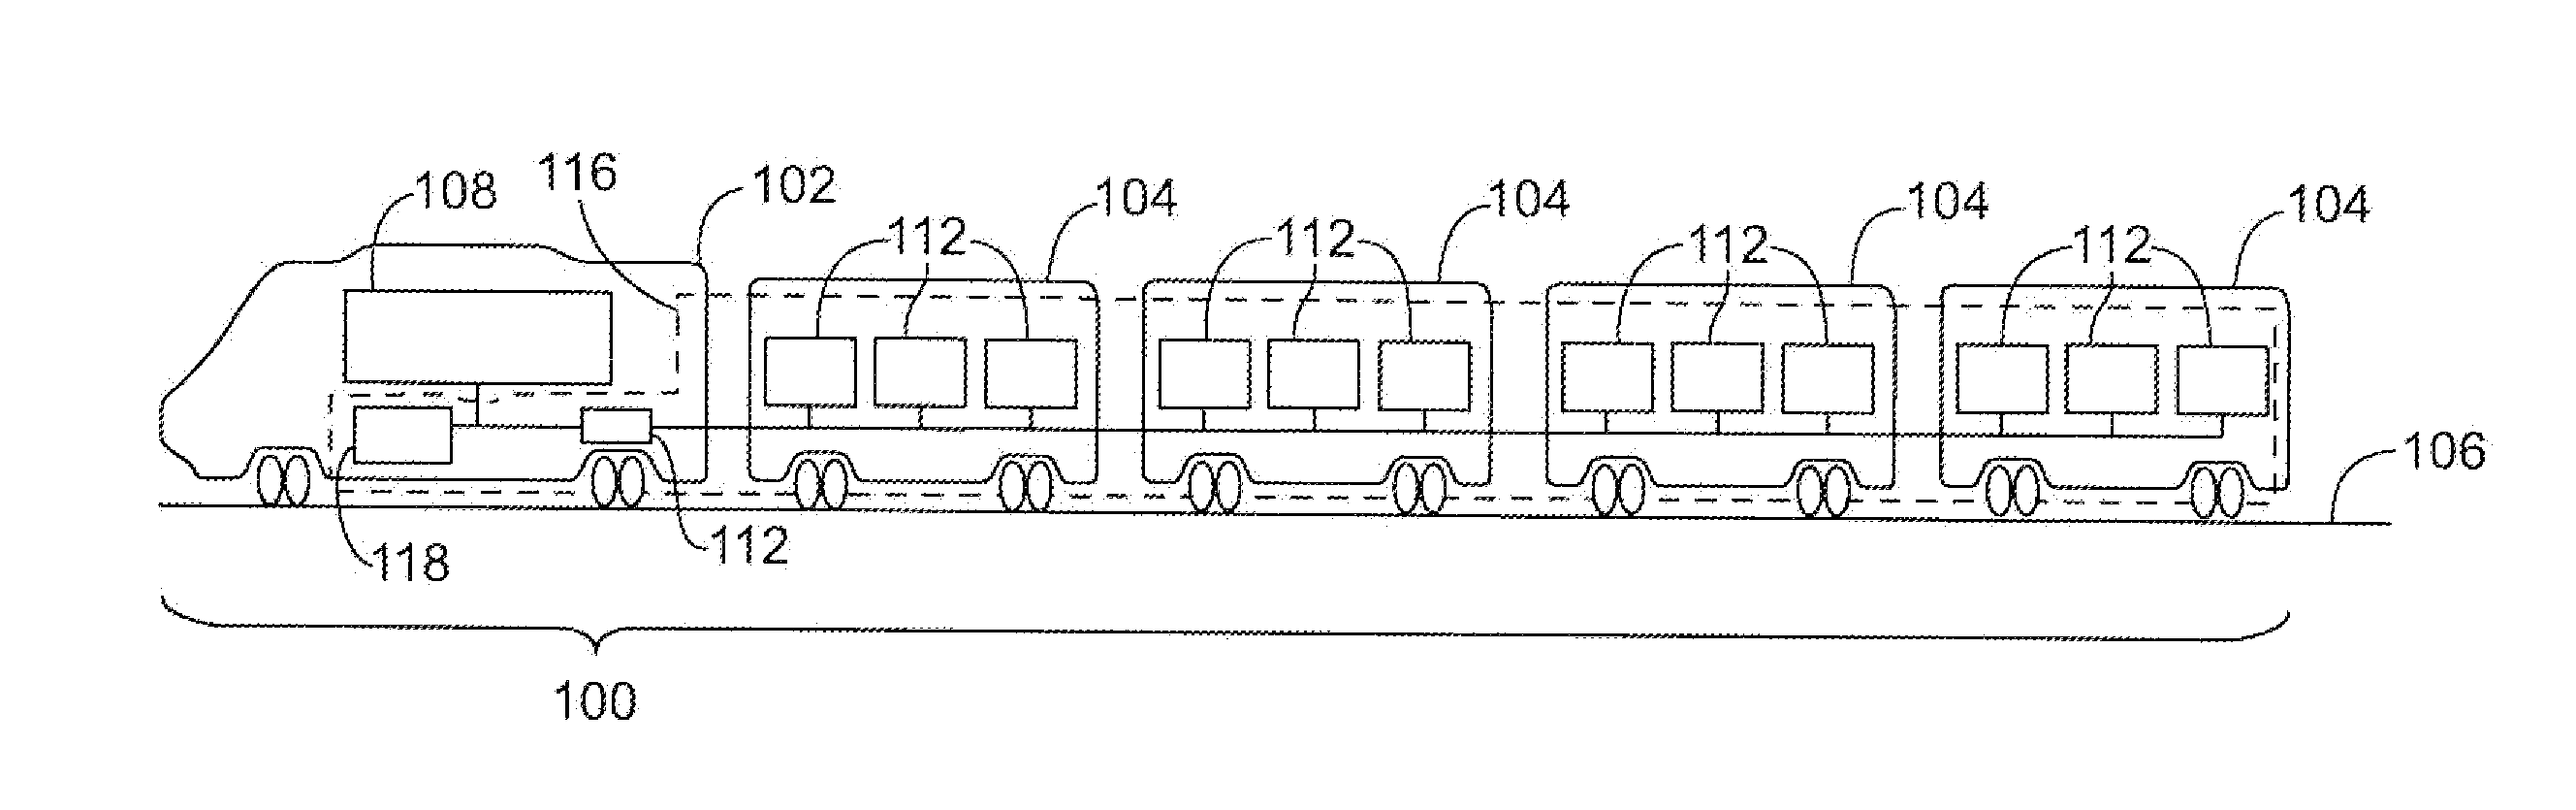 Power distribution systems for powered rail vehicles